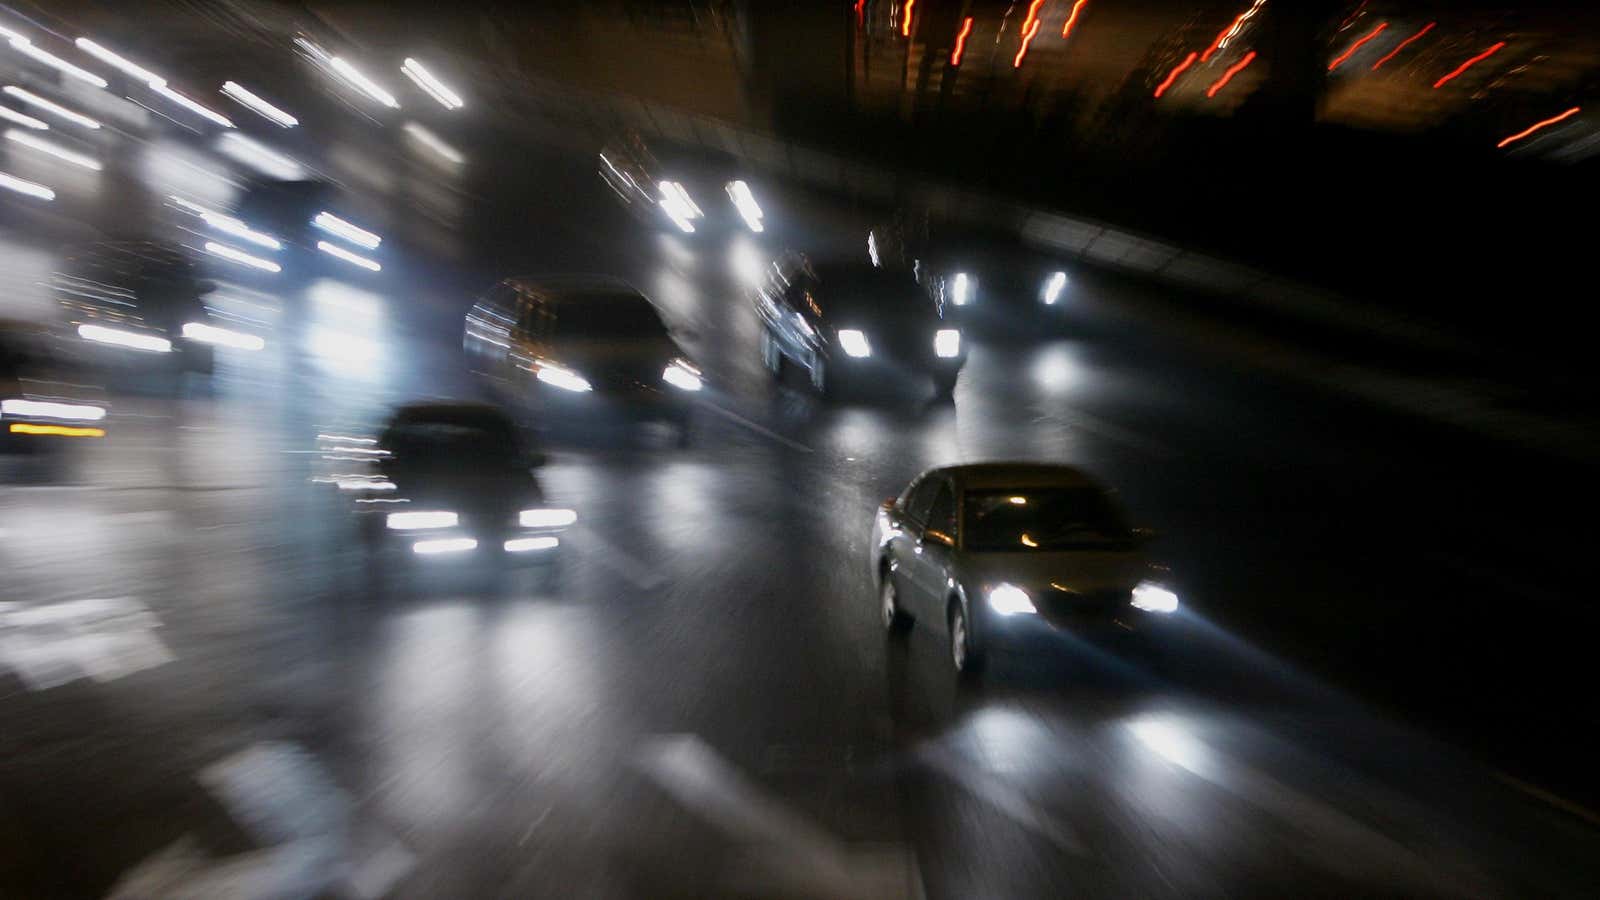 You’re Not Imagining It, Blinding Headlights Are a Real Problem